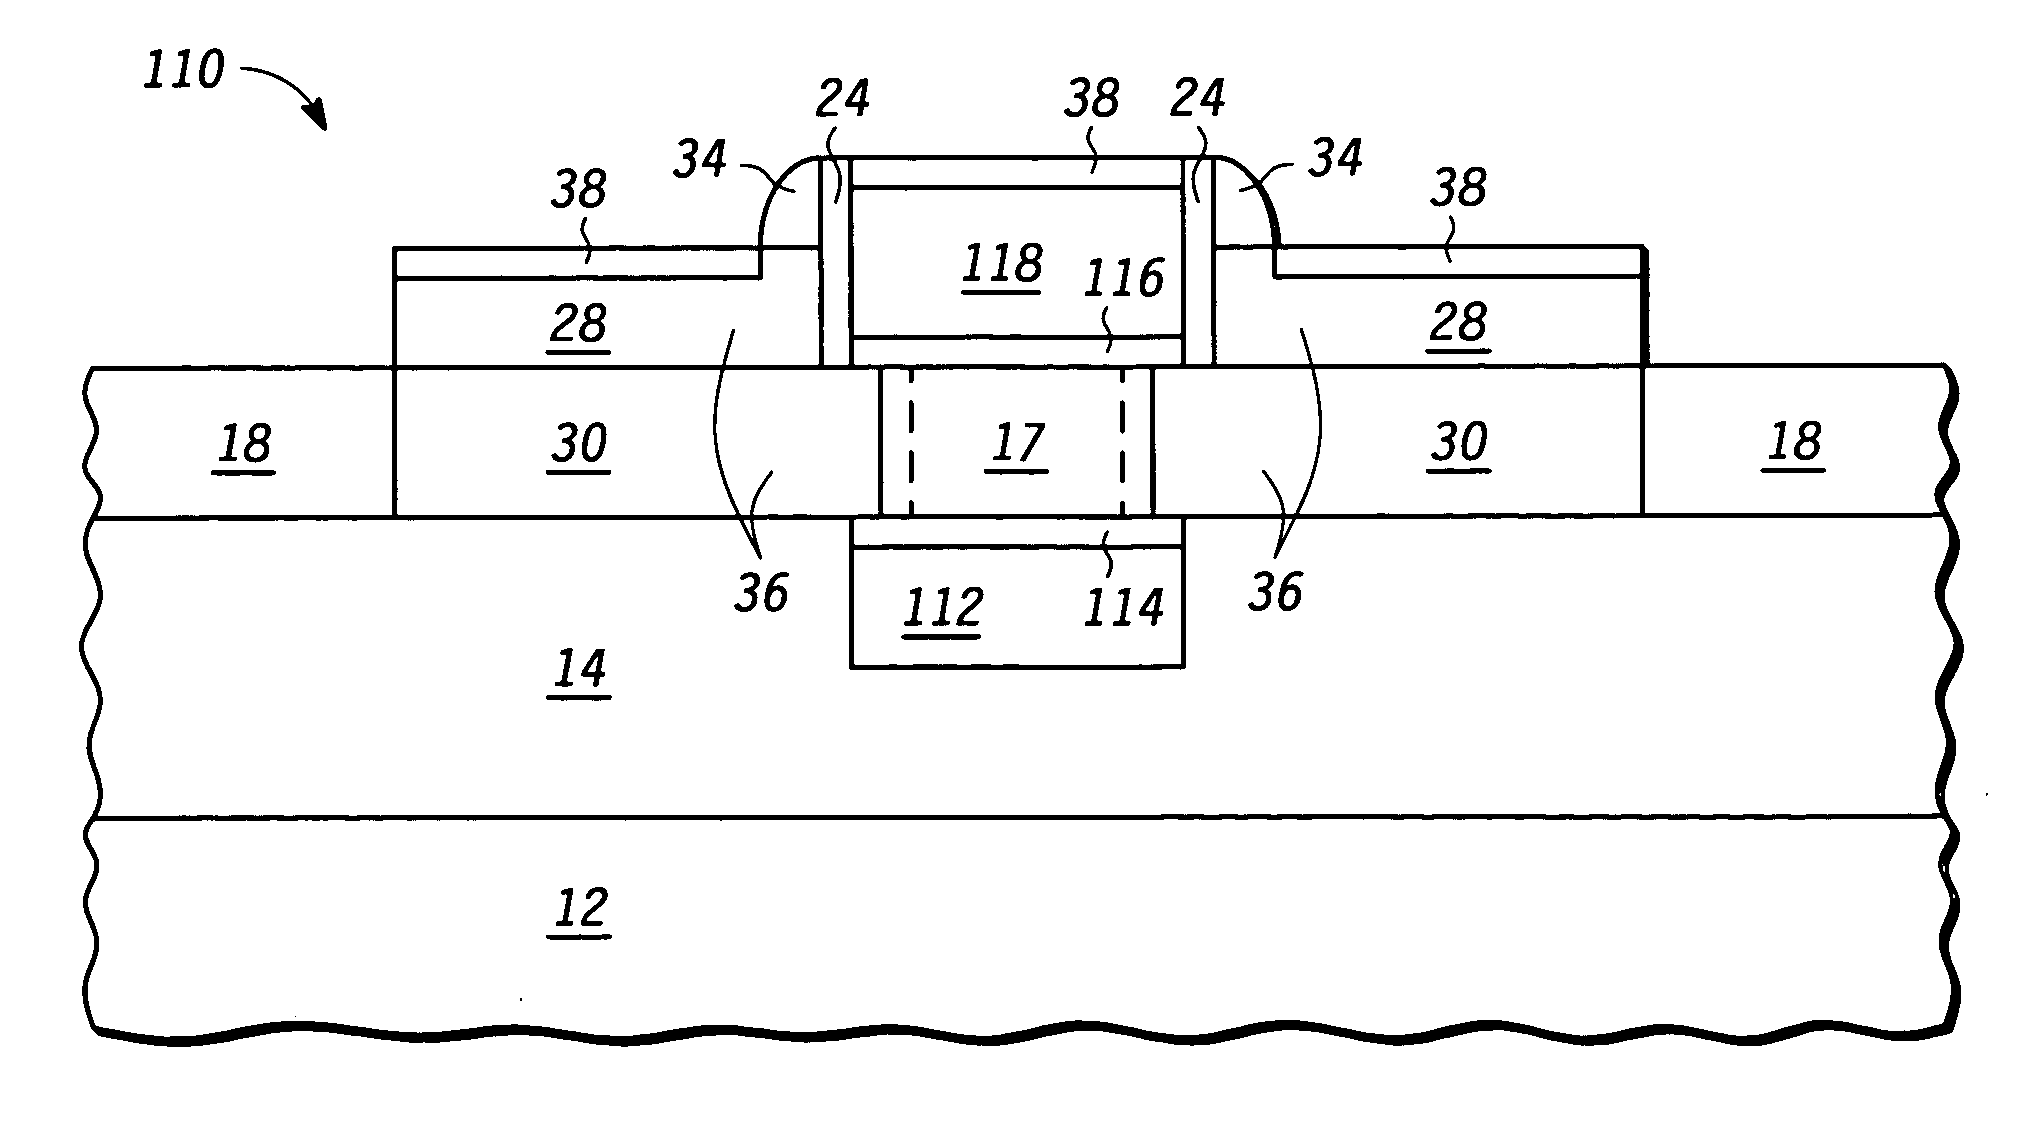 Double gate device having a heterojunction source/drain and strained channel